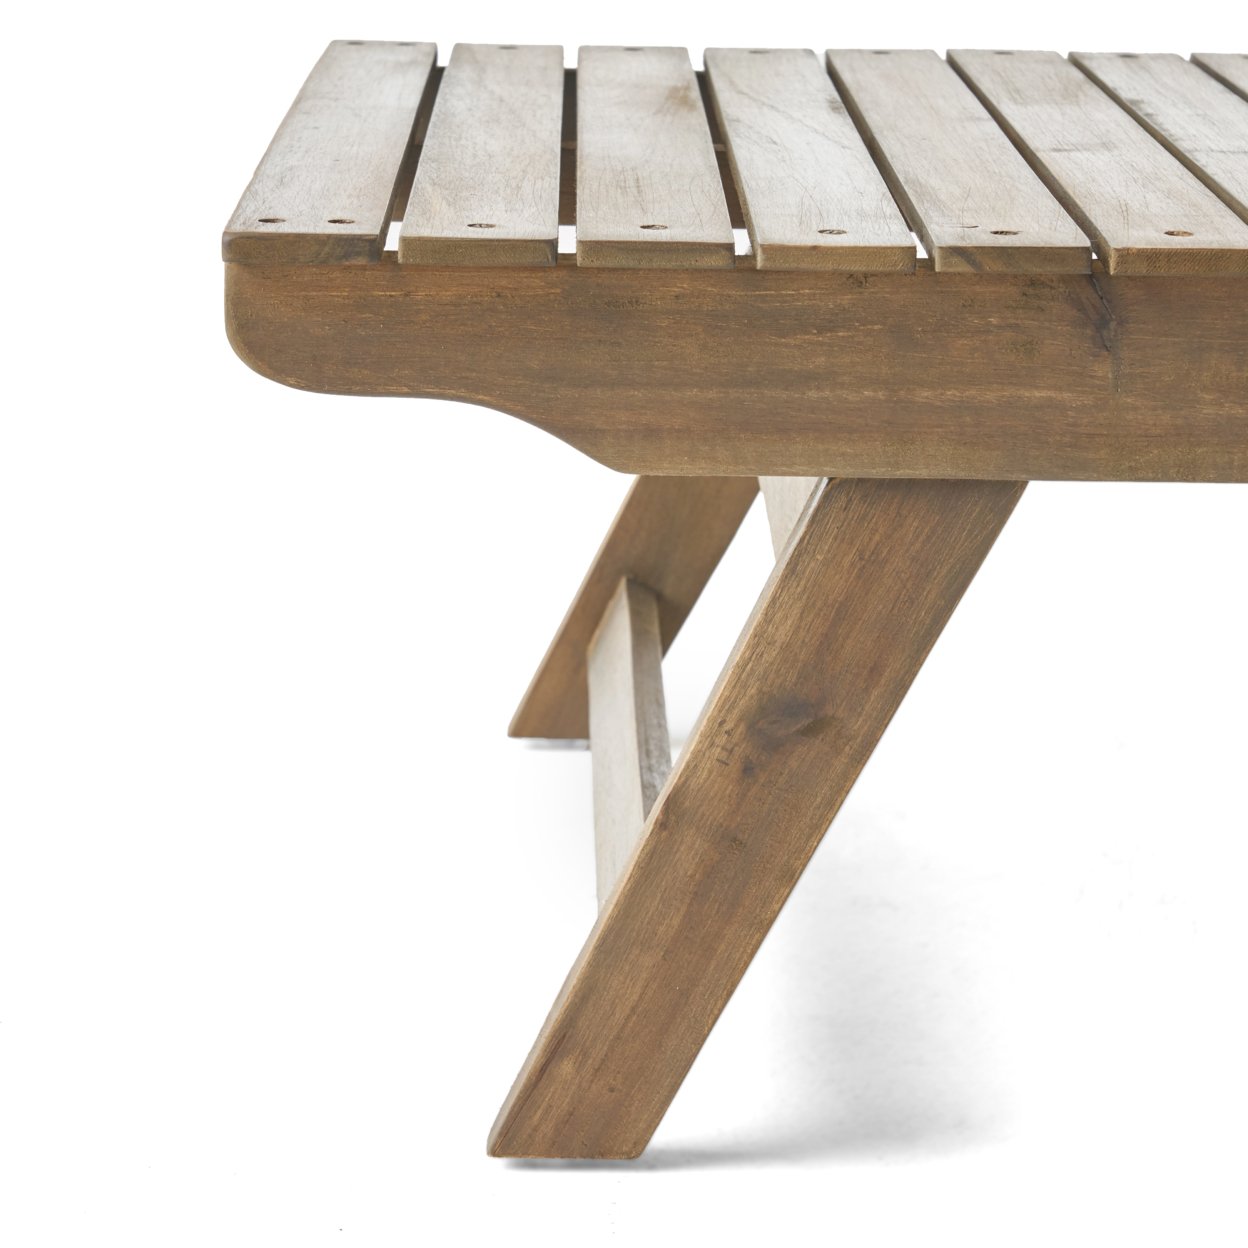 Kailee Outdoor Wooden Coffee Table - Gray Finish